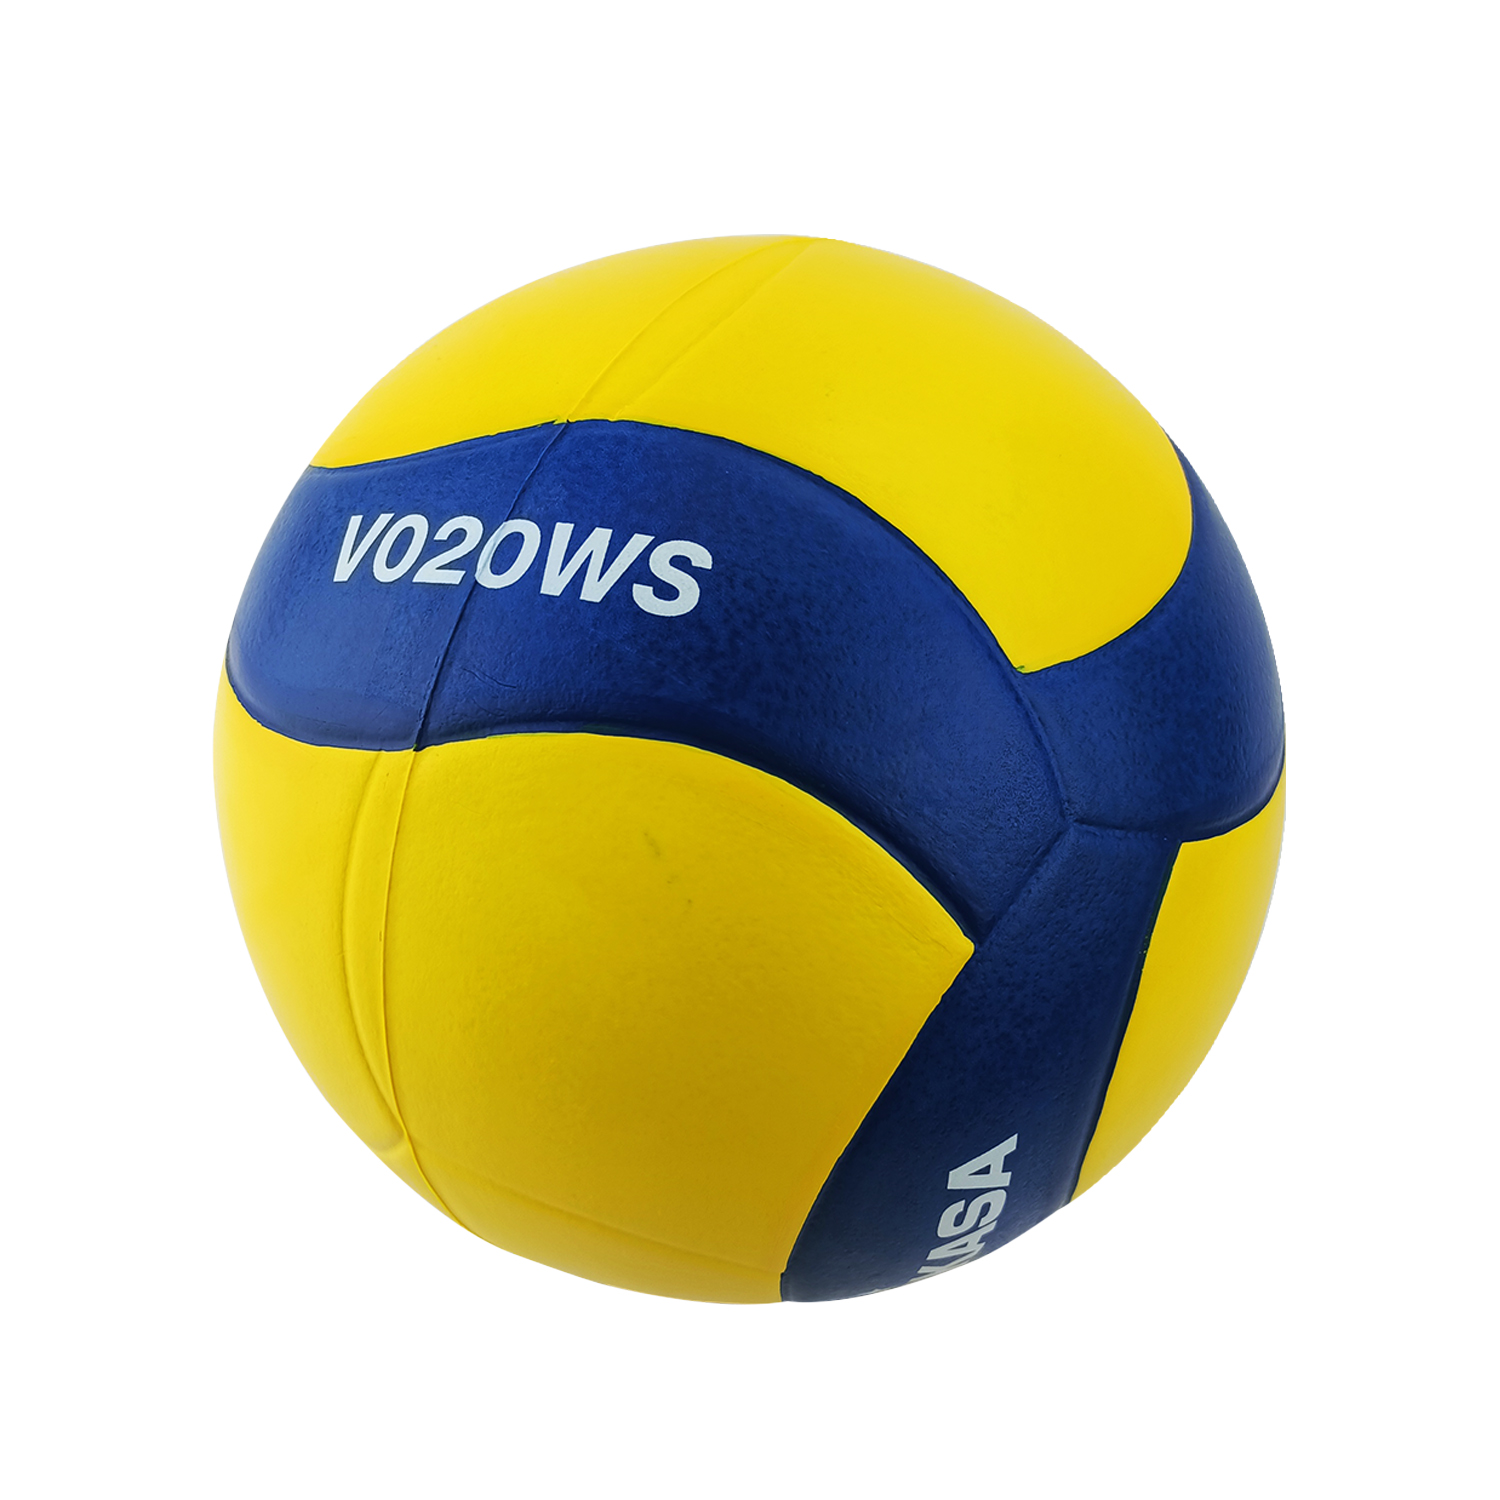 MIKASA V020WS VW SERIES VOLLEYBALL RUBBER SIZE 5, , large image number null